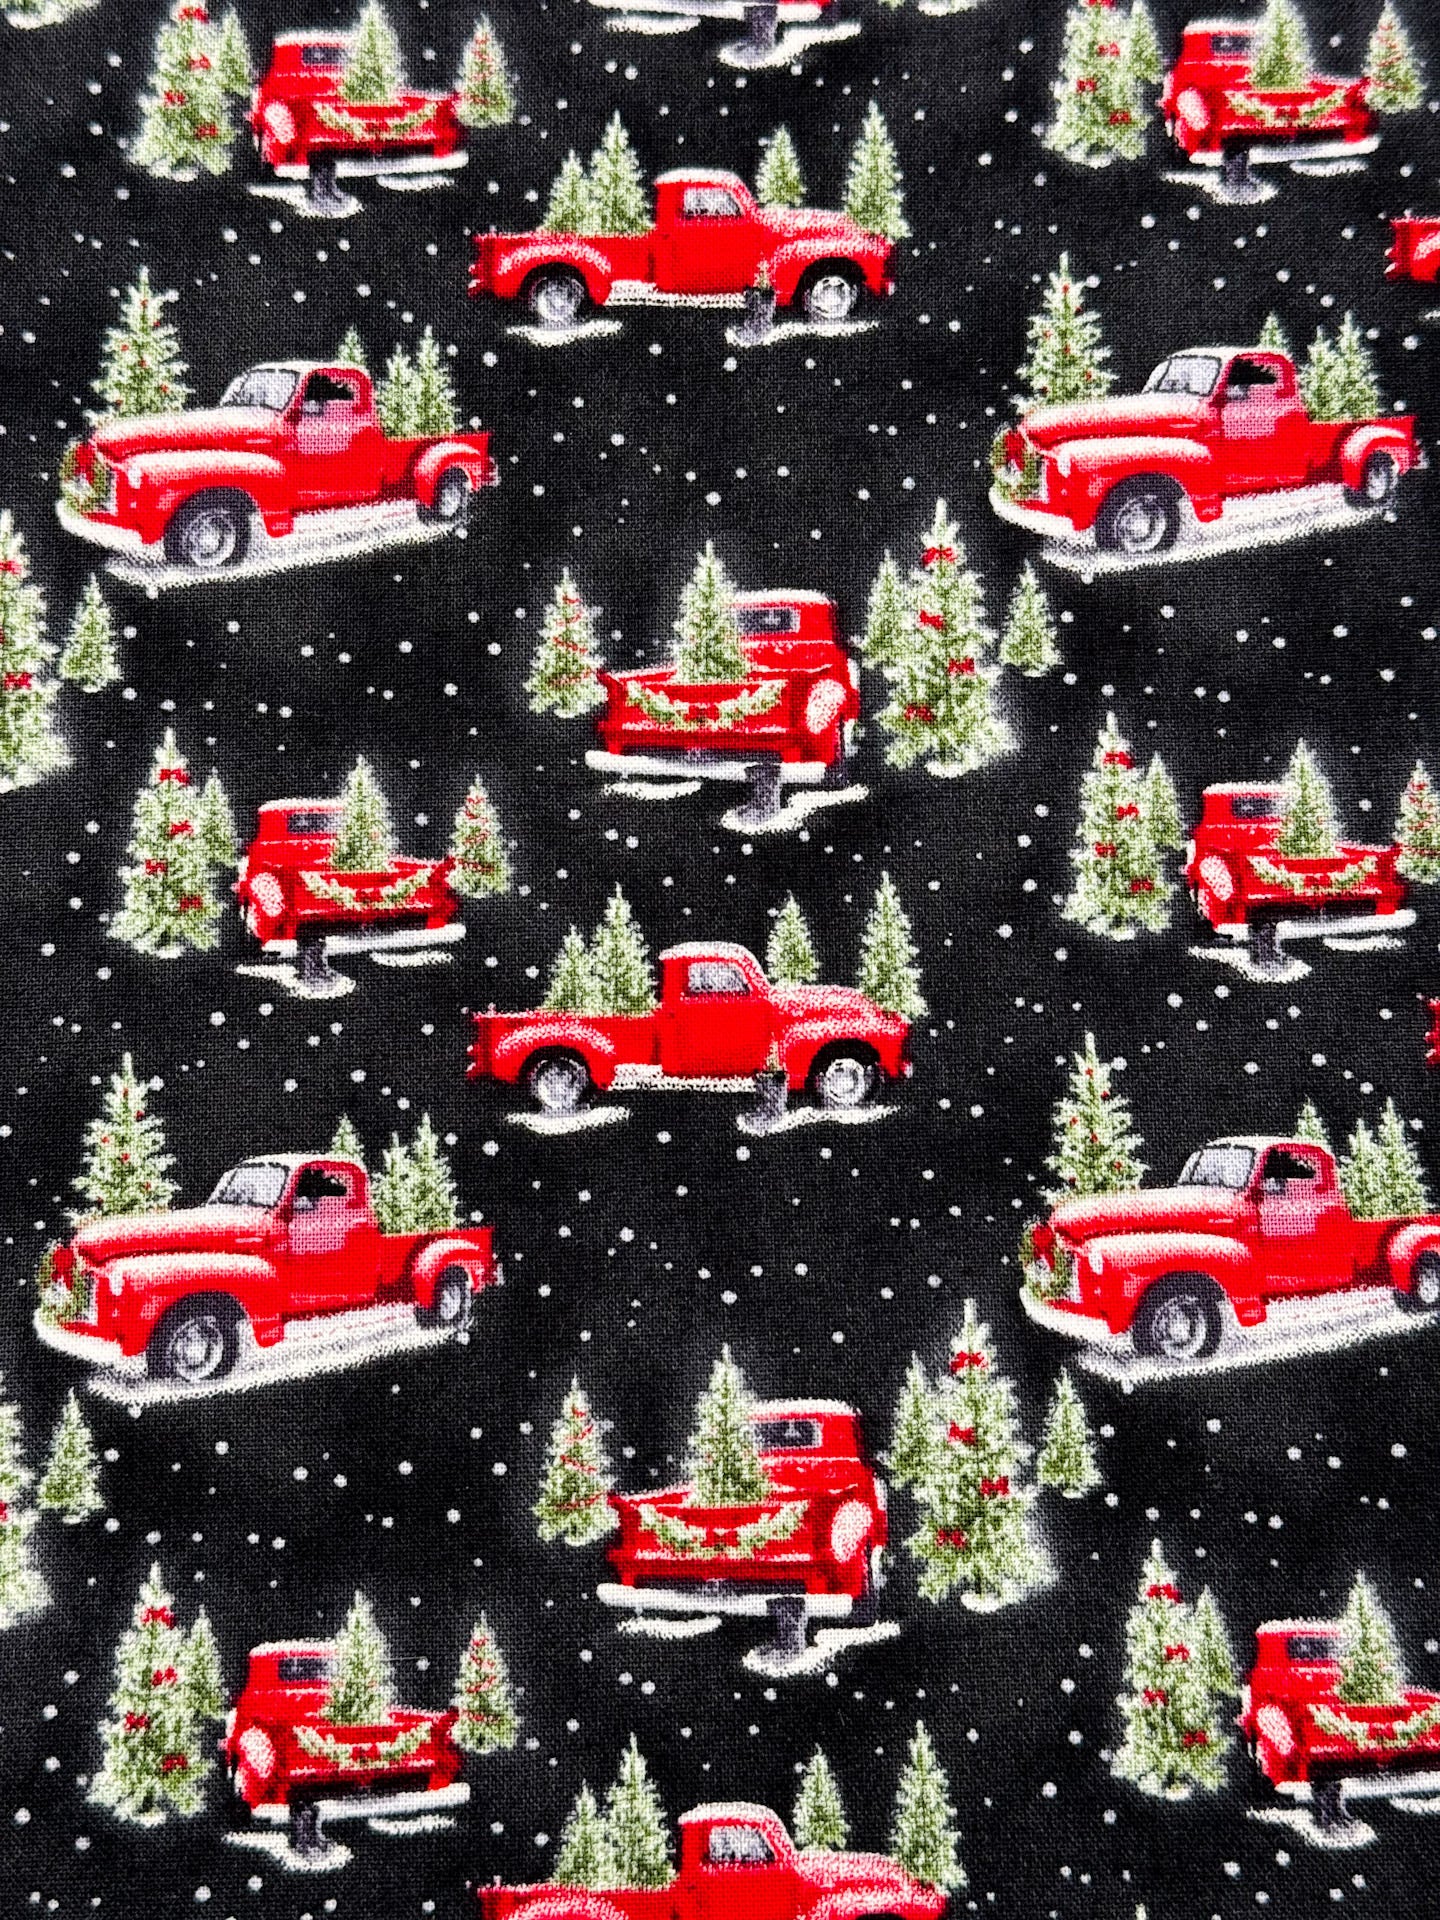 Red Truck Christmas fabric by the yard